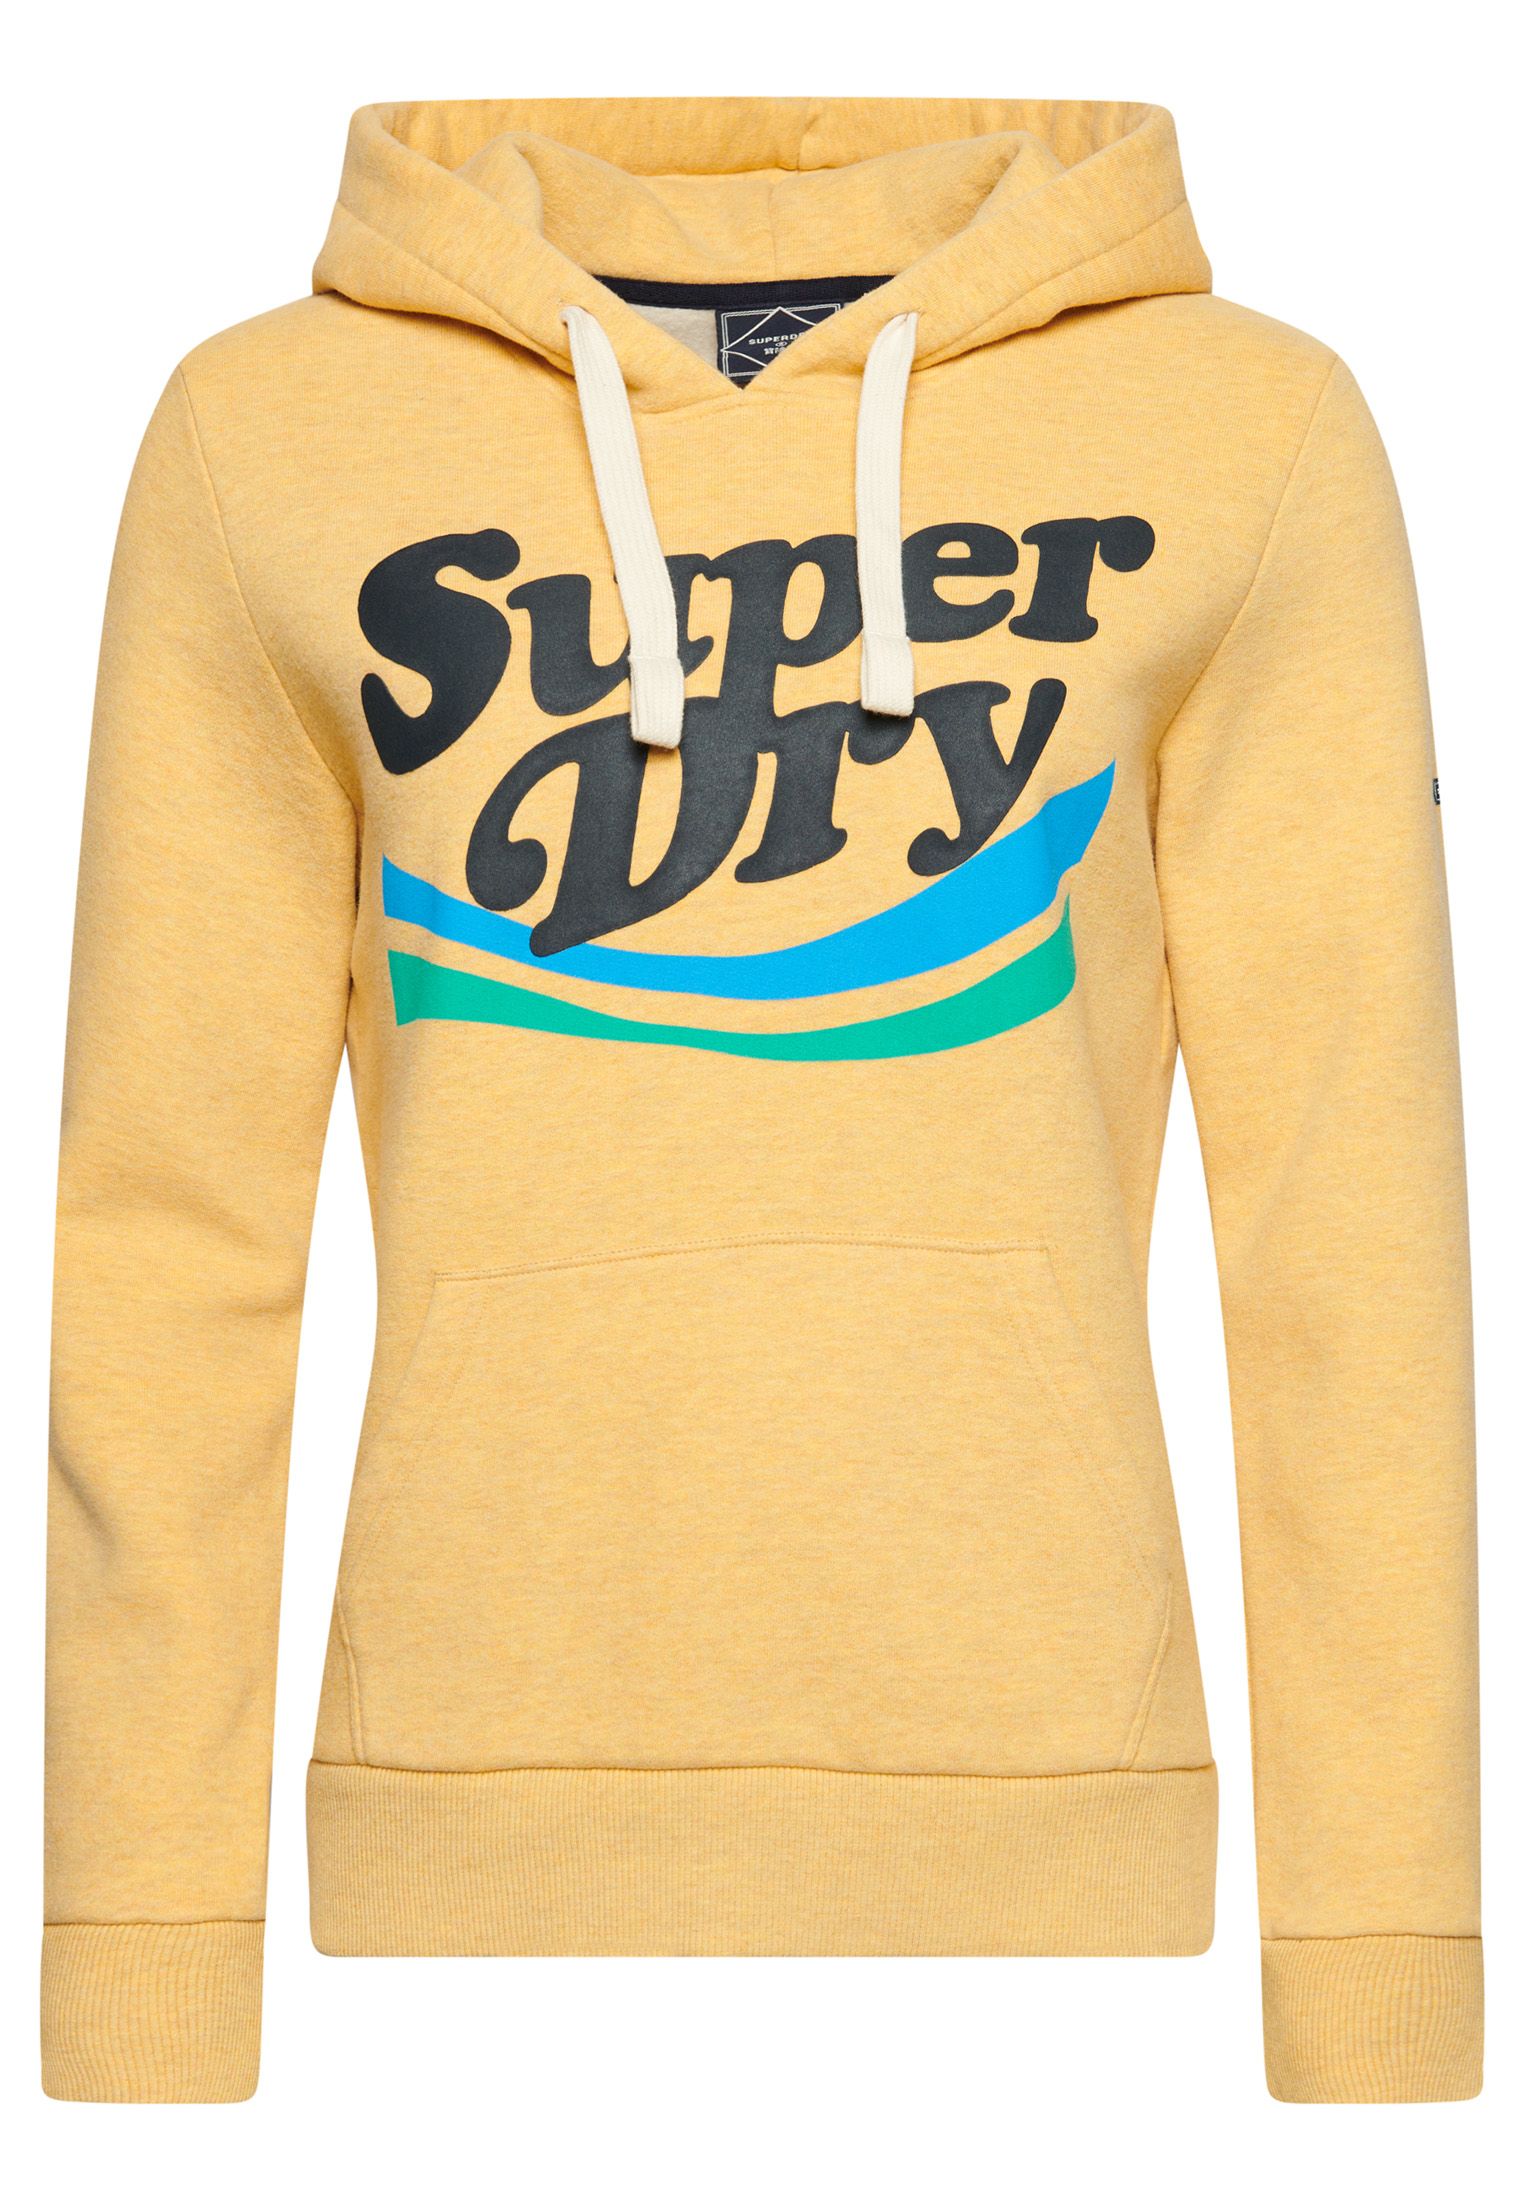 Our Vintage Cooper Nostalgia Hoodie brings a playful nature to your wardrobe. Retro-inspired graphics pay a loving homage to iconic designs, and effortlessly turn your casual out into a statement. With brushed lining and ribbed trims, these hoodies embody that trusted Superdry quality and are sure to keep you cosy.Relaxed fit – the classic Superdry fit. Not too slim, not too loose, just right. Go for your normal sizeDrawstring hoodLarge front pocketRibbed cuffs and hemBrushed liningSuperdry patch